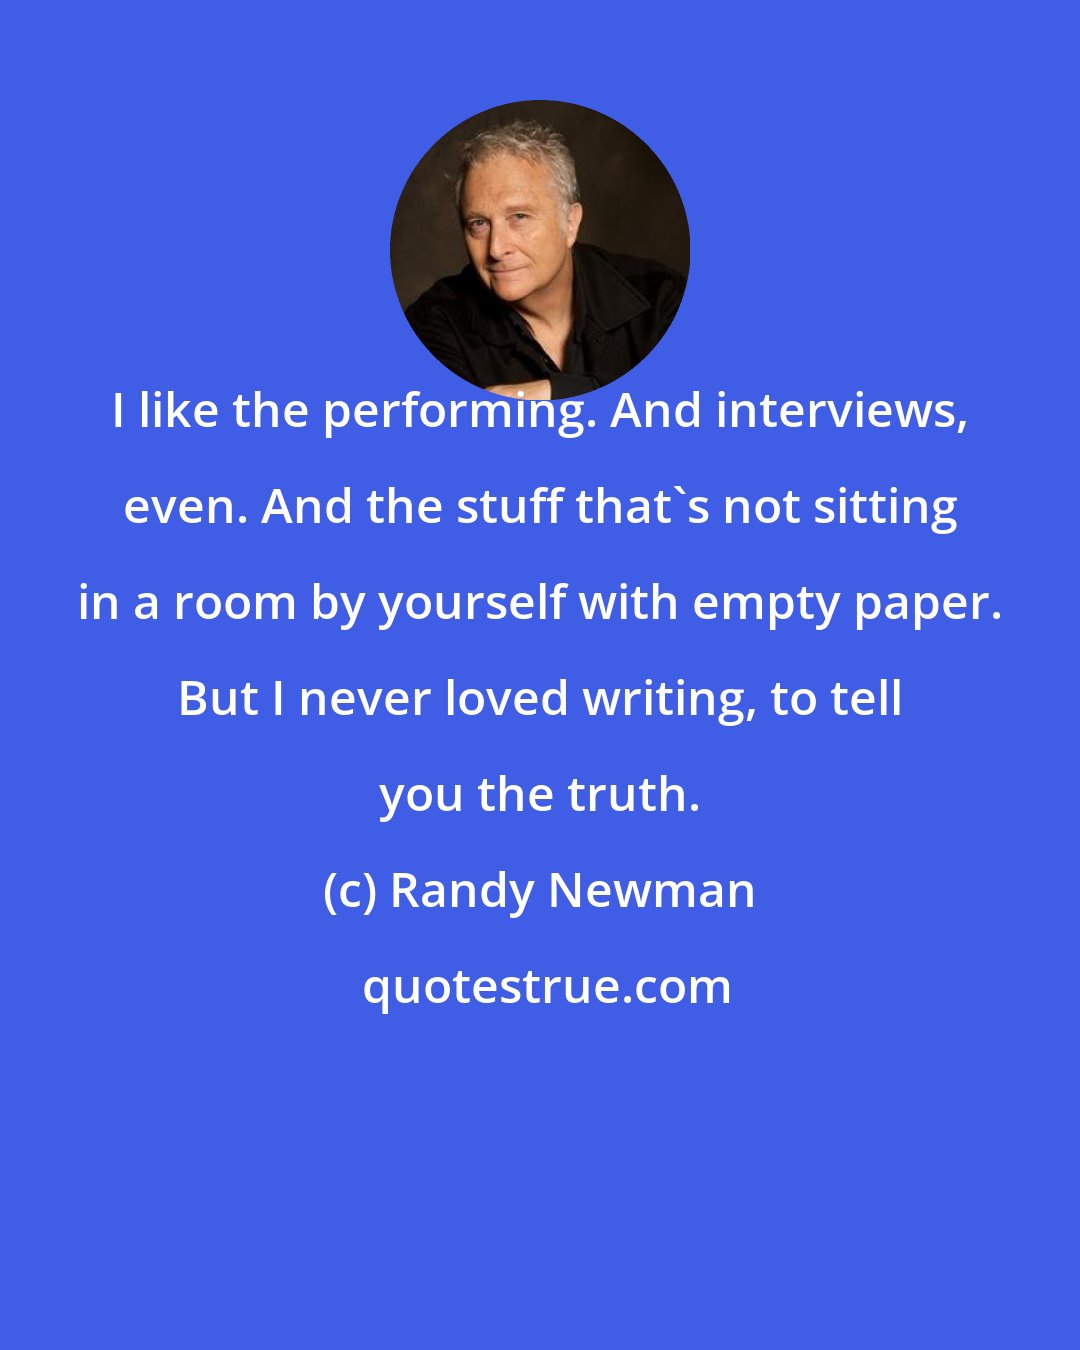 Randy Newman: I like the performing. And interviews, even. And the stuff that's not sitting in a room by yourself with empty paper. But I never loved writing, to tell you the truth.